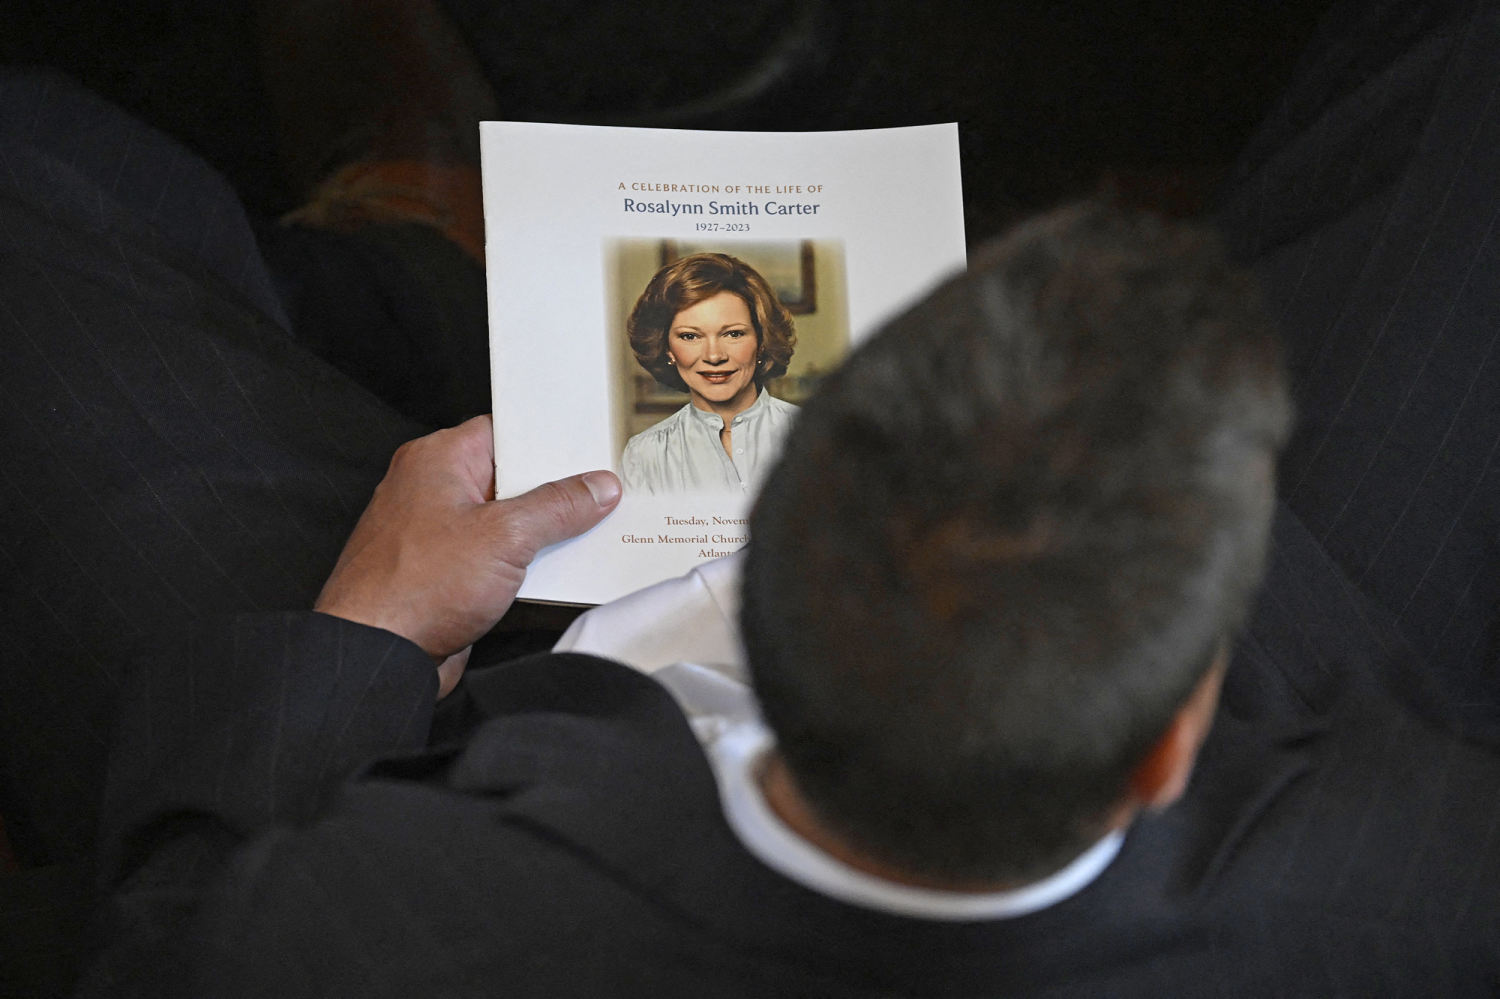 Former first lady Rosalynn Carter honored in private tribute service